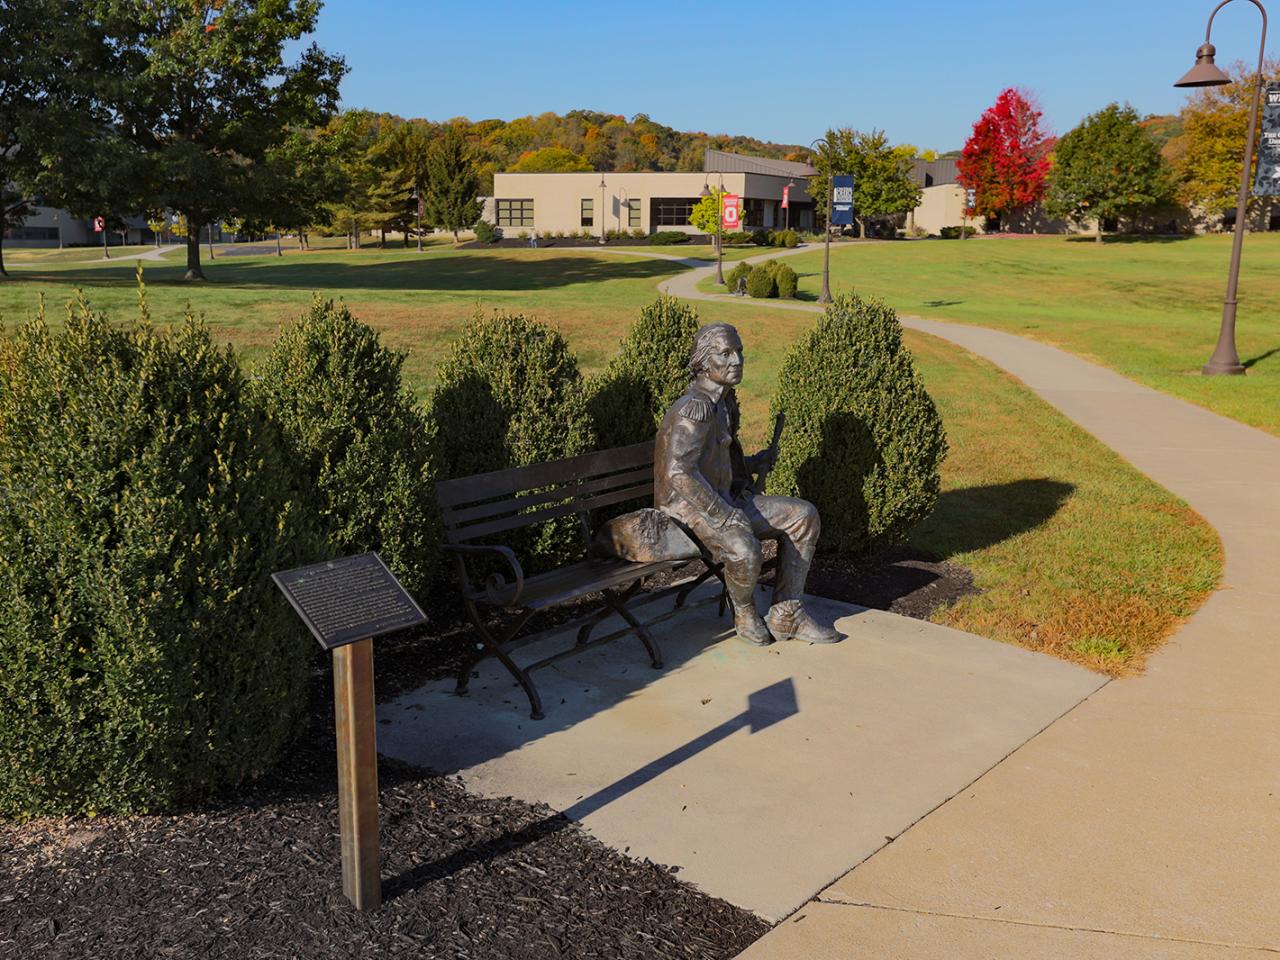 A bronze statue of George Washington seated on a bench.